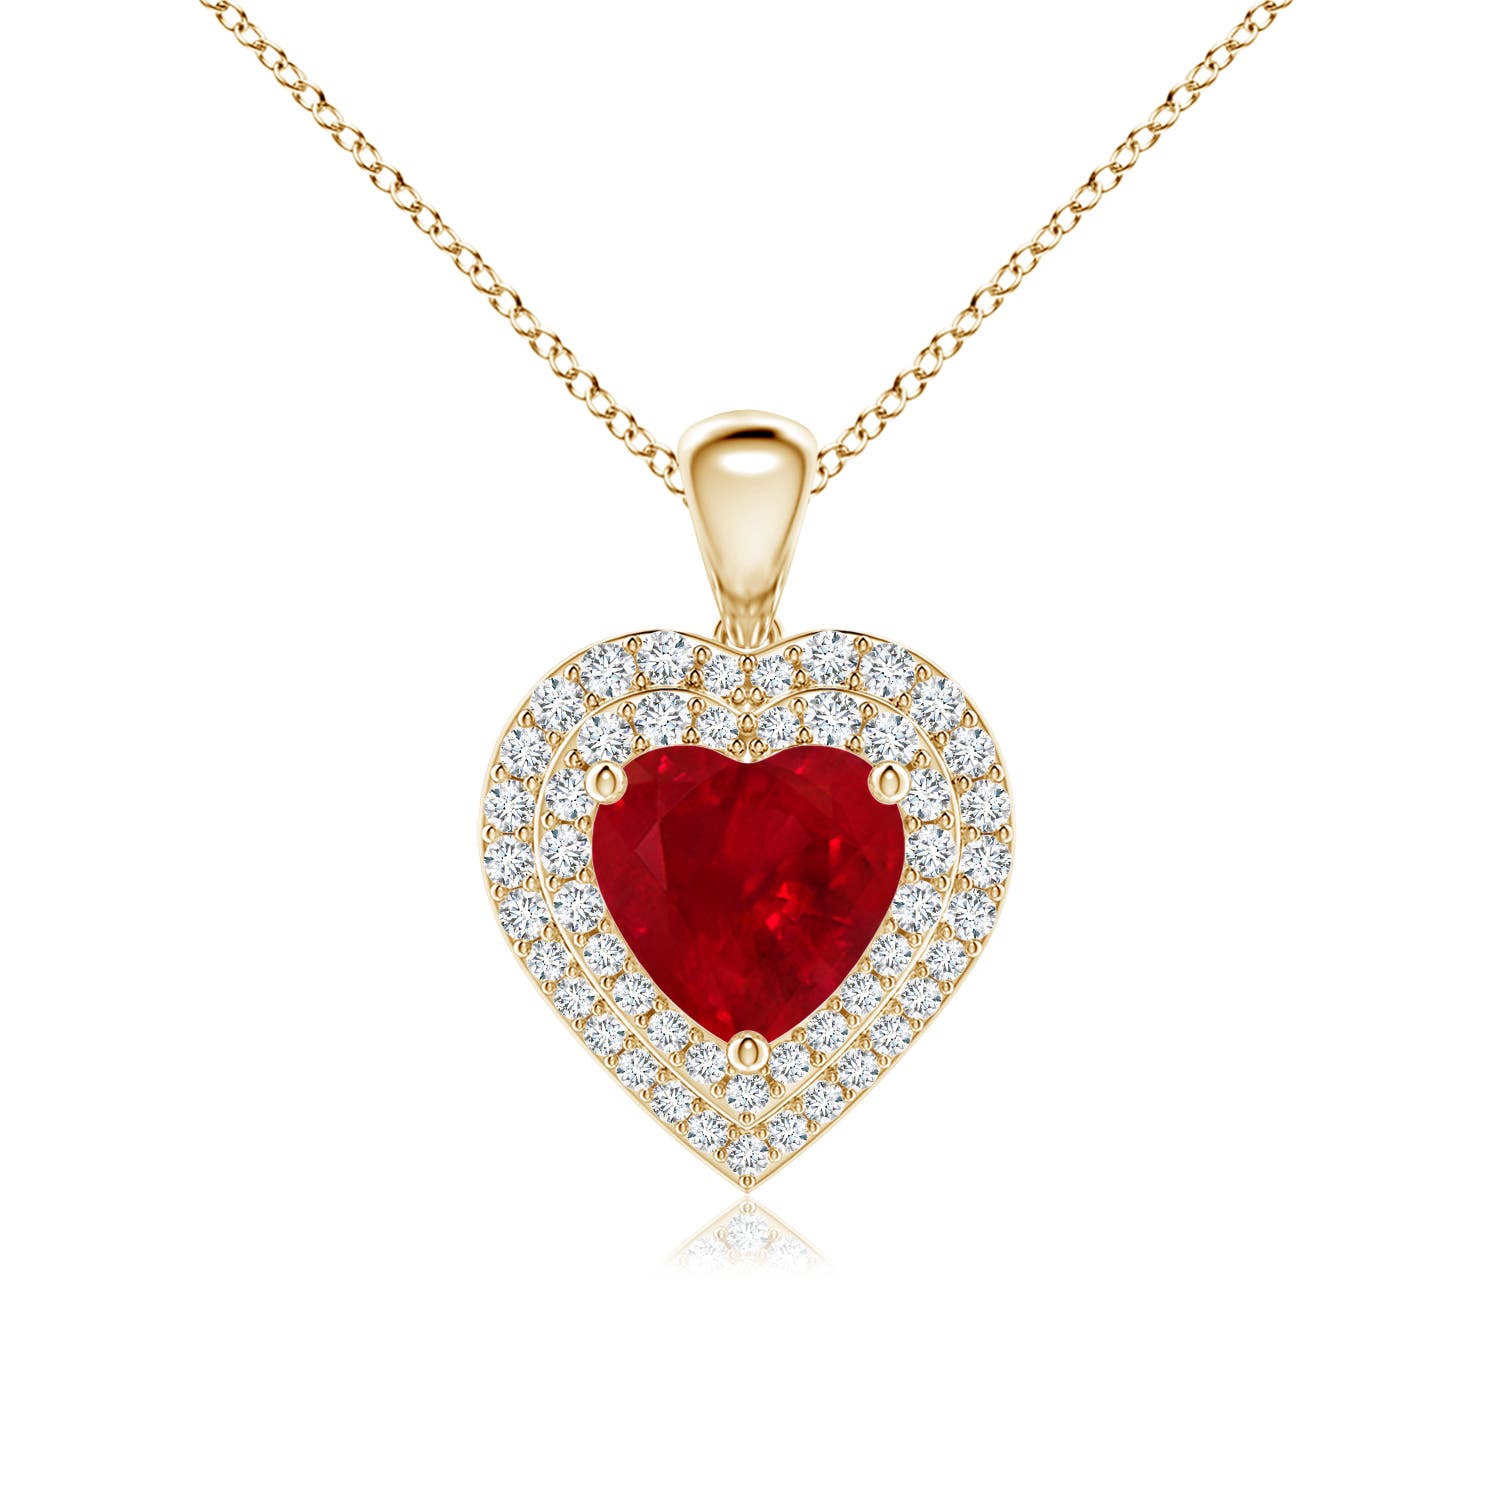 AAA - Ruby / 2.08 CT / 14 KT Yellow Gold